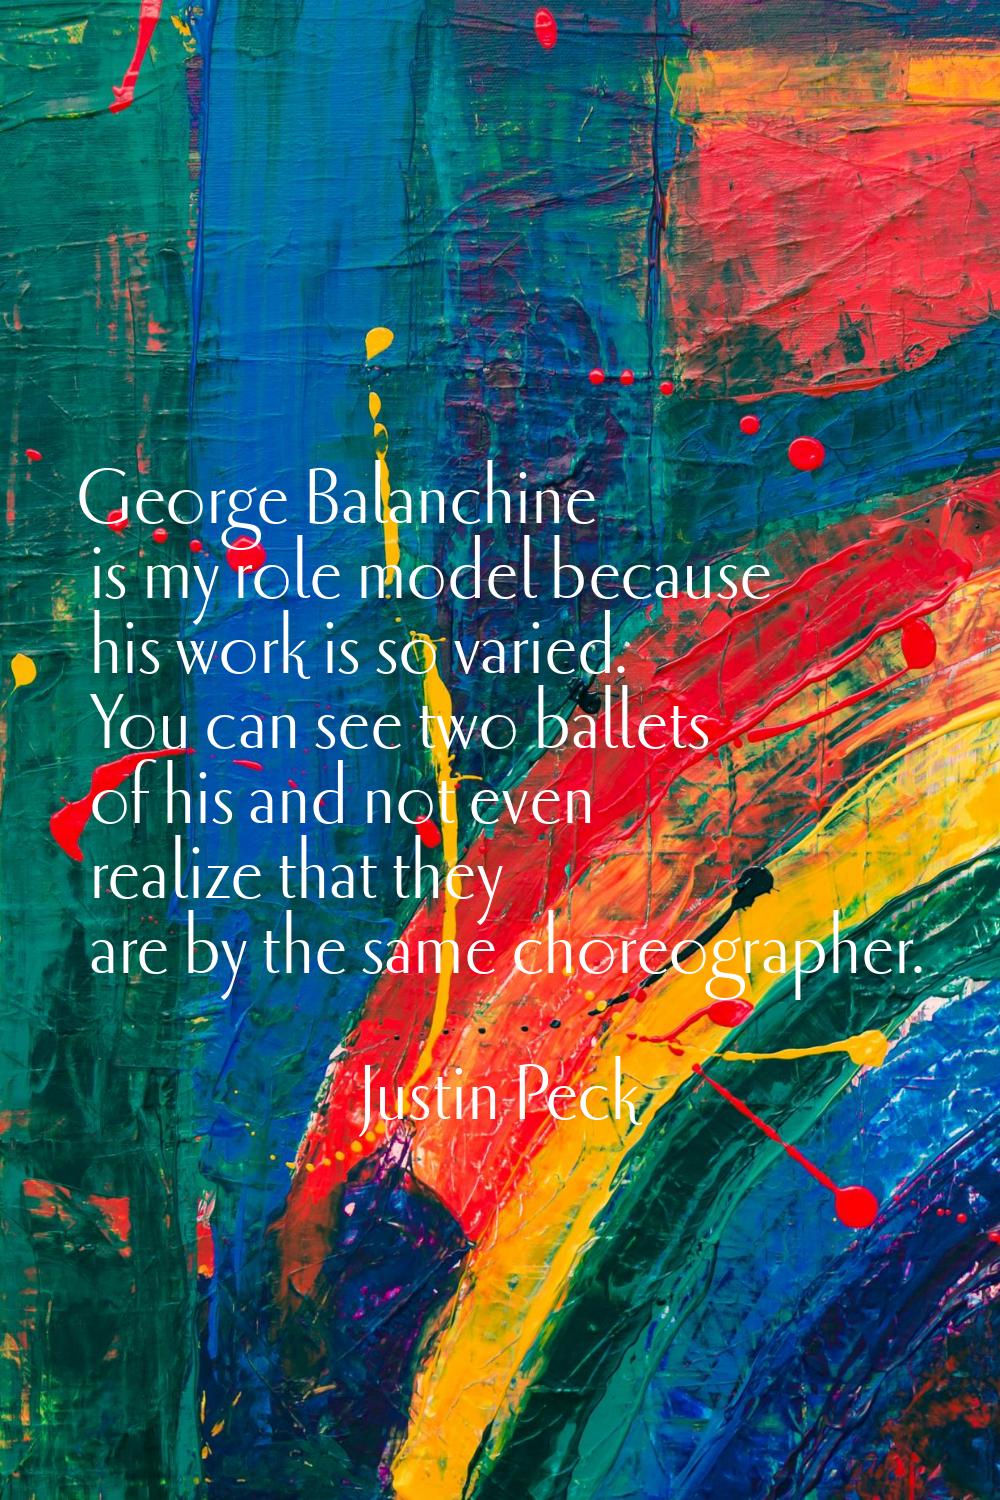 George Balanchine is my role model because his work is so varied. You can see two ballets of his an